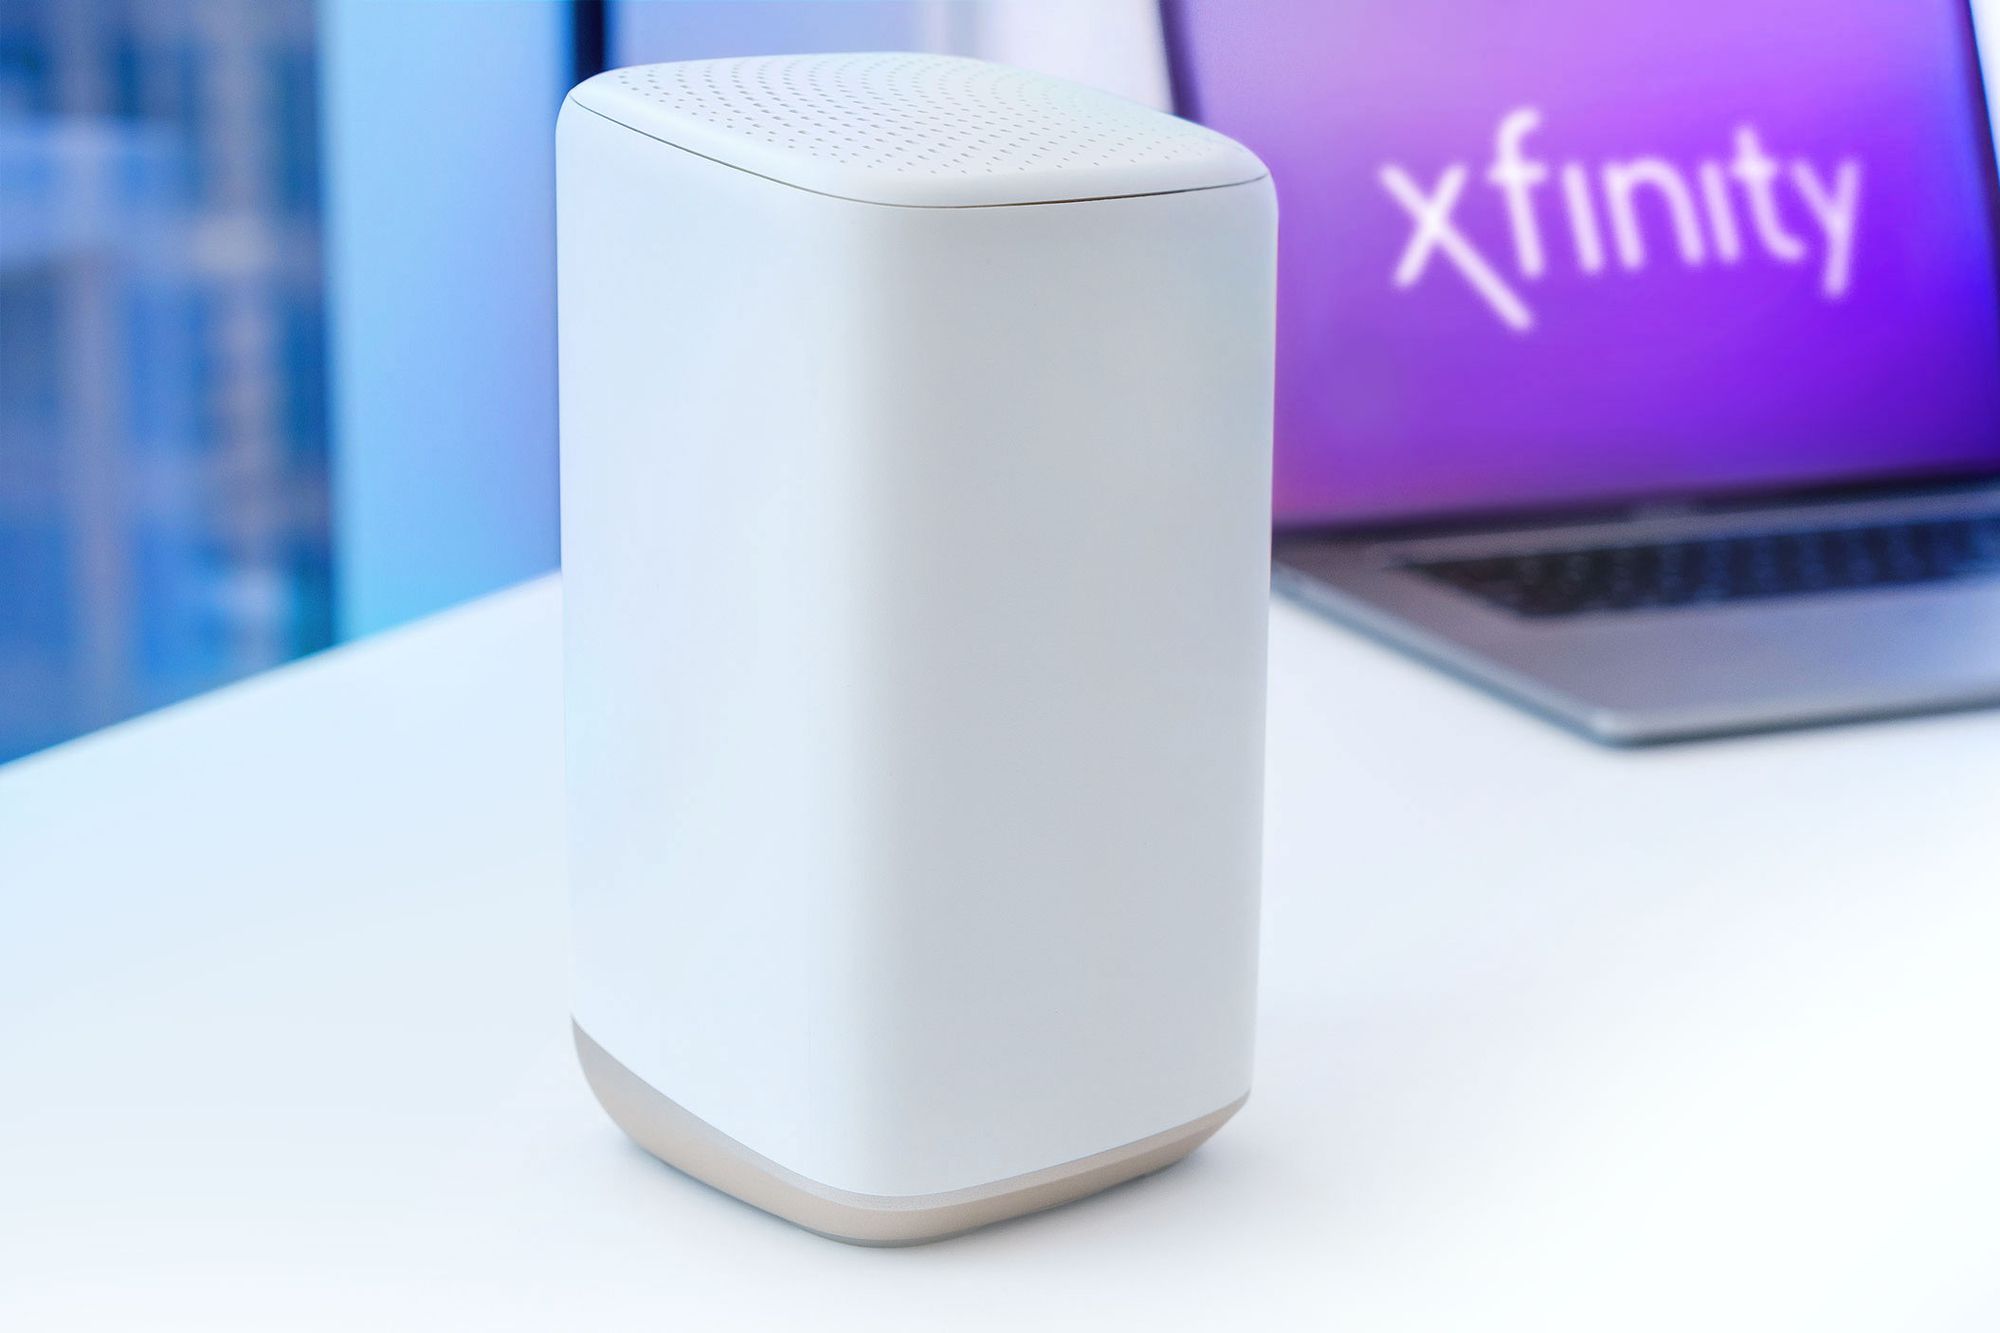 How To Connect To Xfinity Wi-Fi